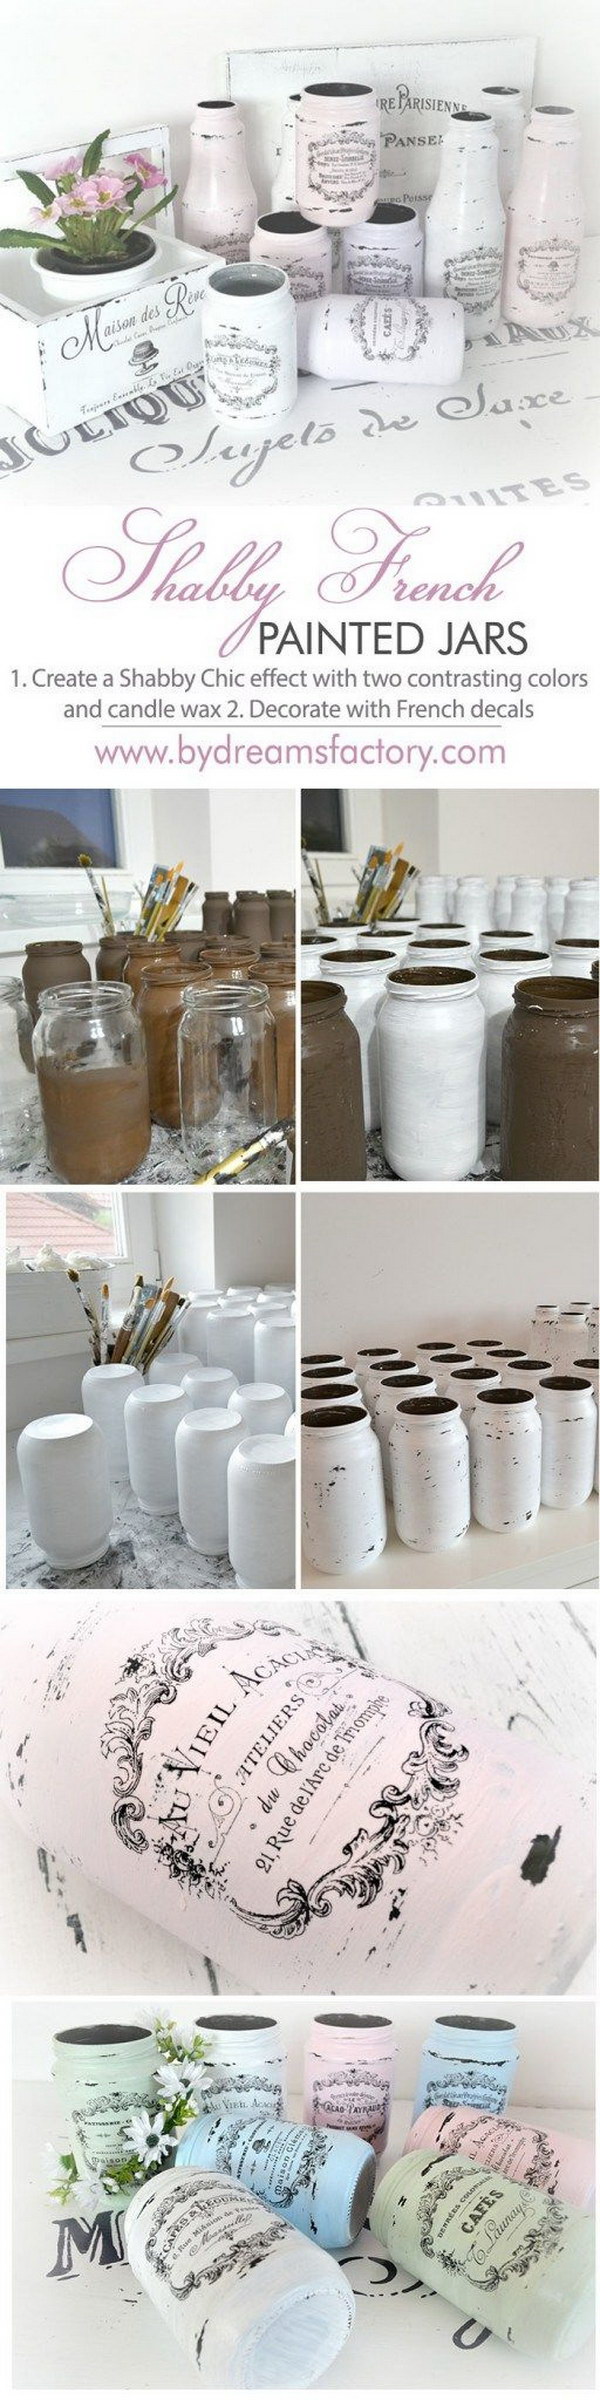 Shabby French Painted Jars. 